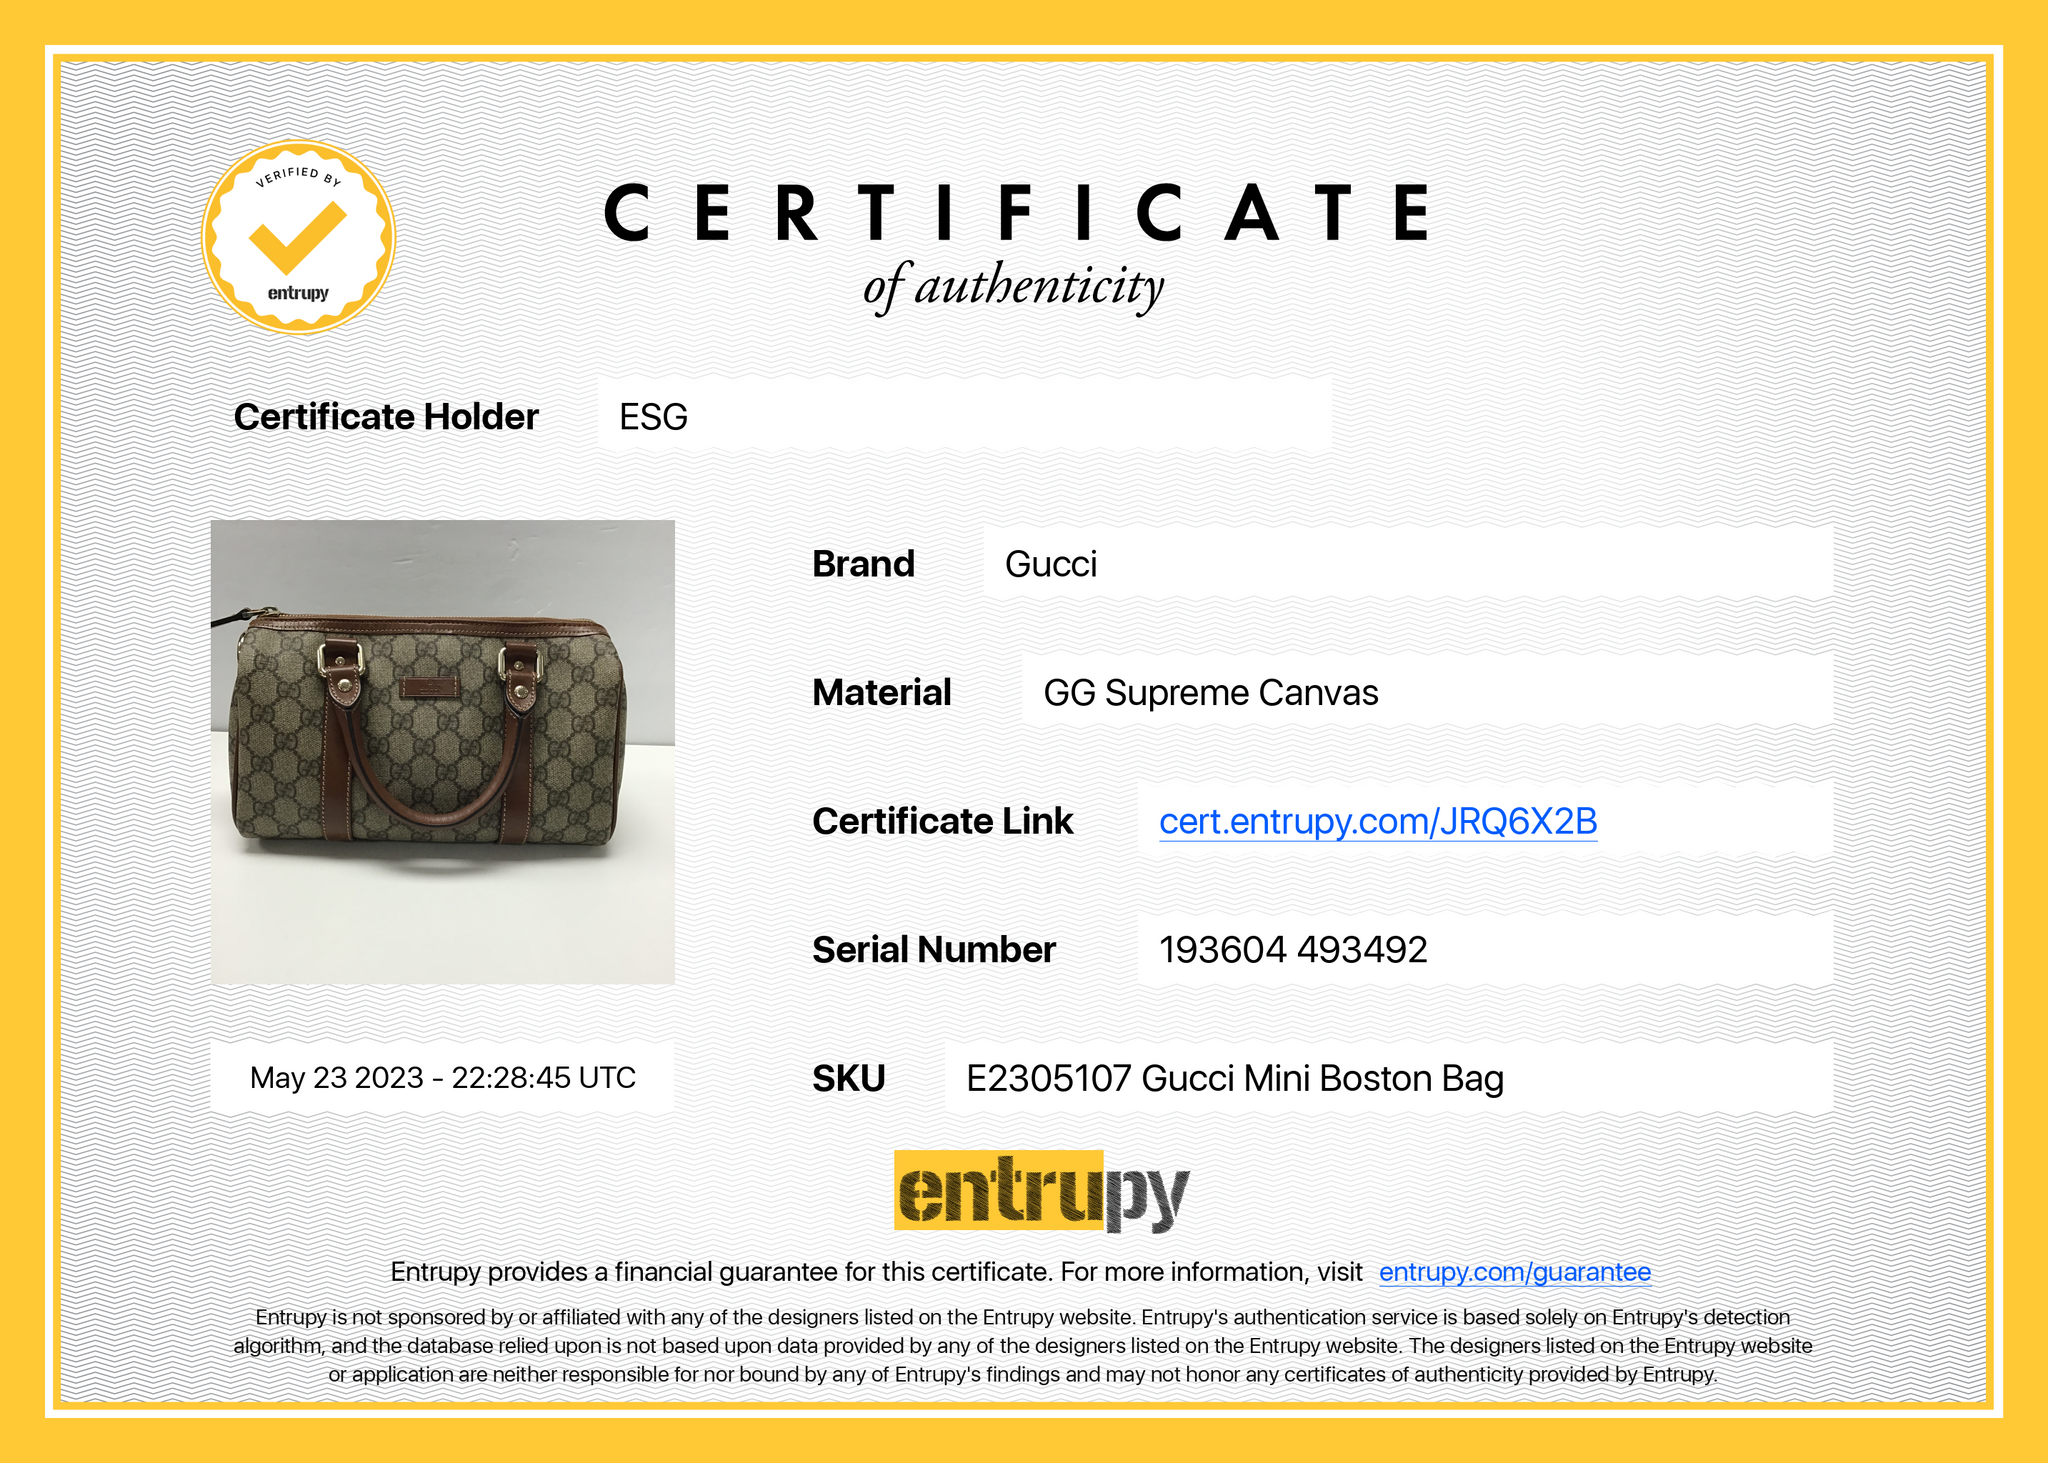 AUTHENTIC GUCCI HAND BAG PURSE GG CANVAS LEATHER 113009 for Sale